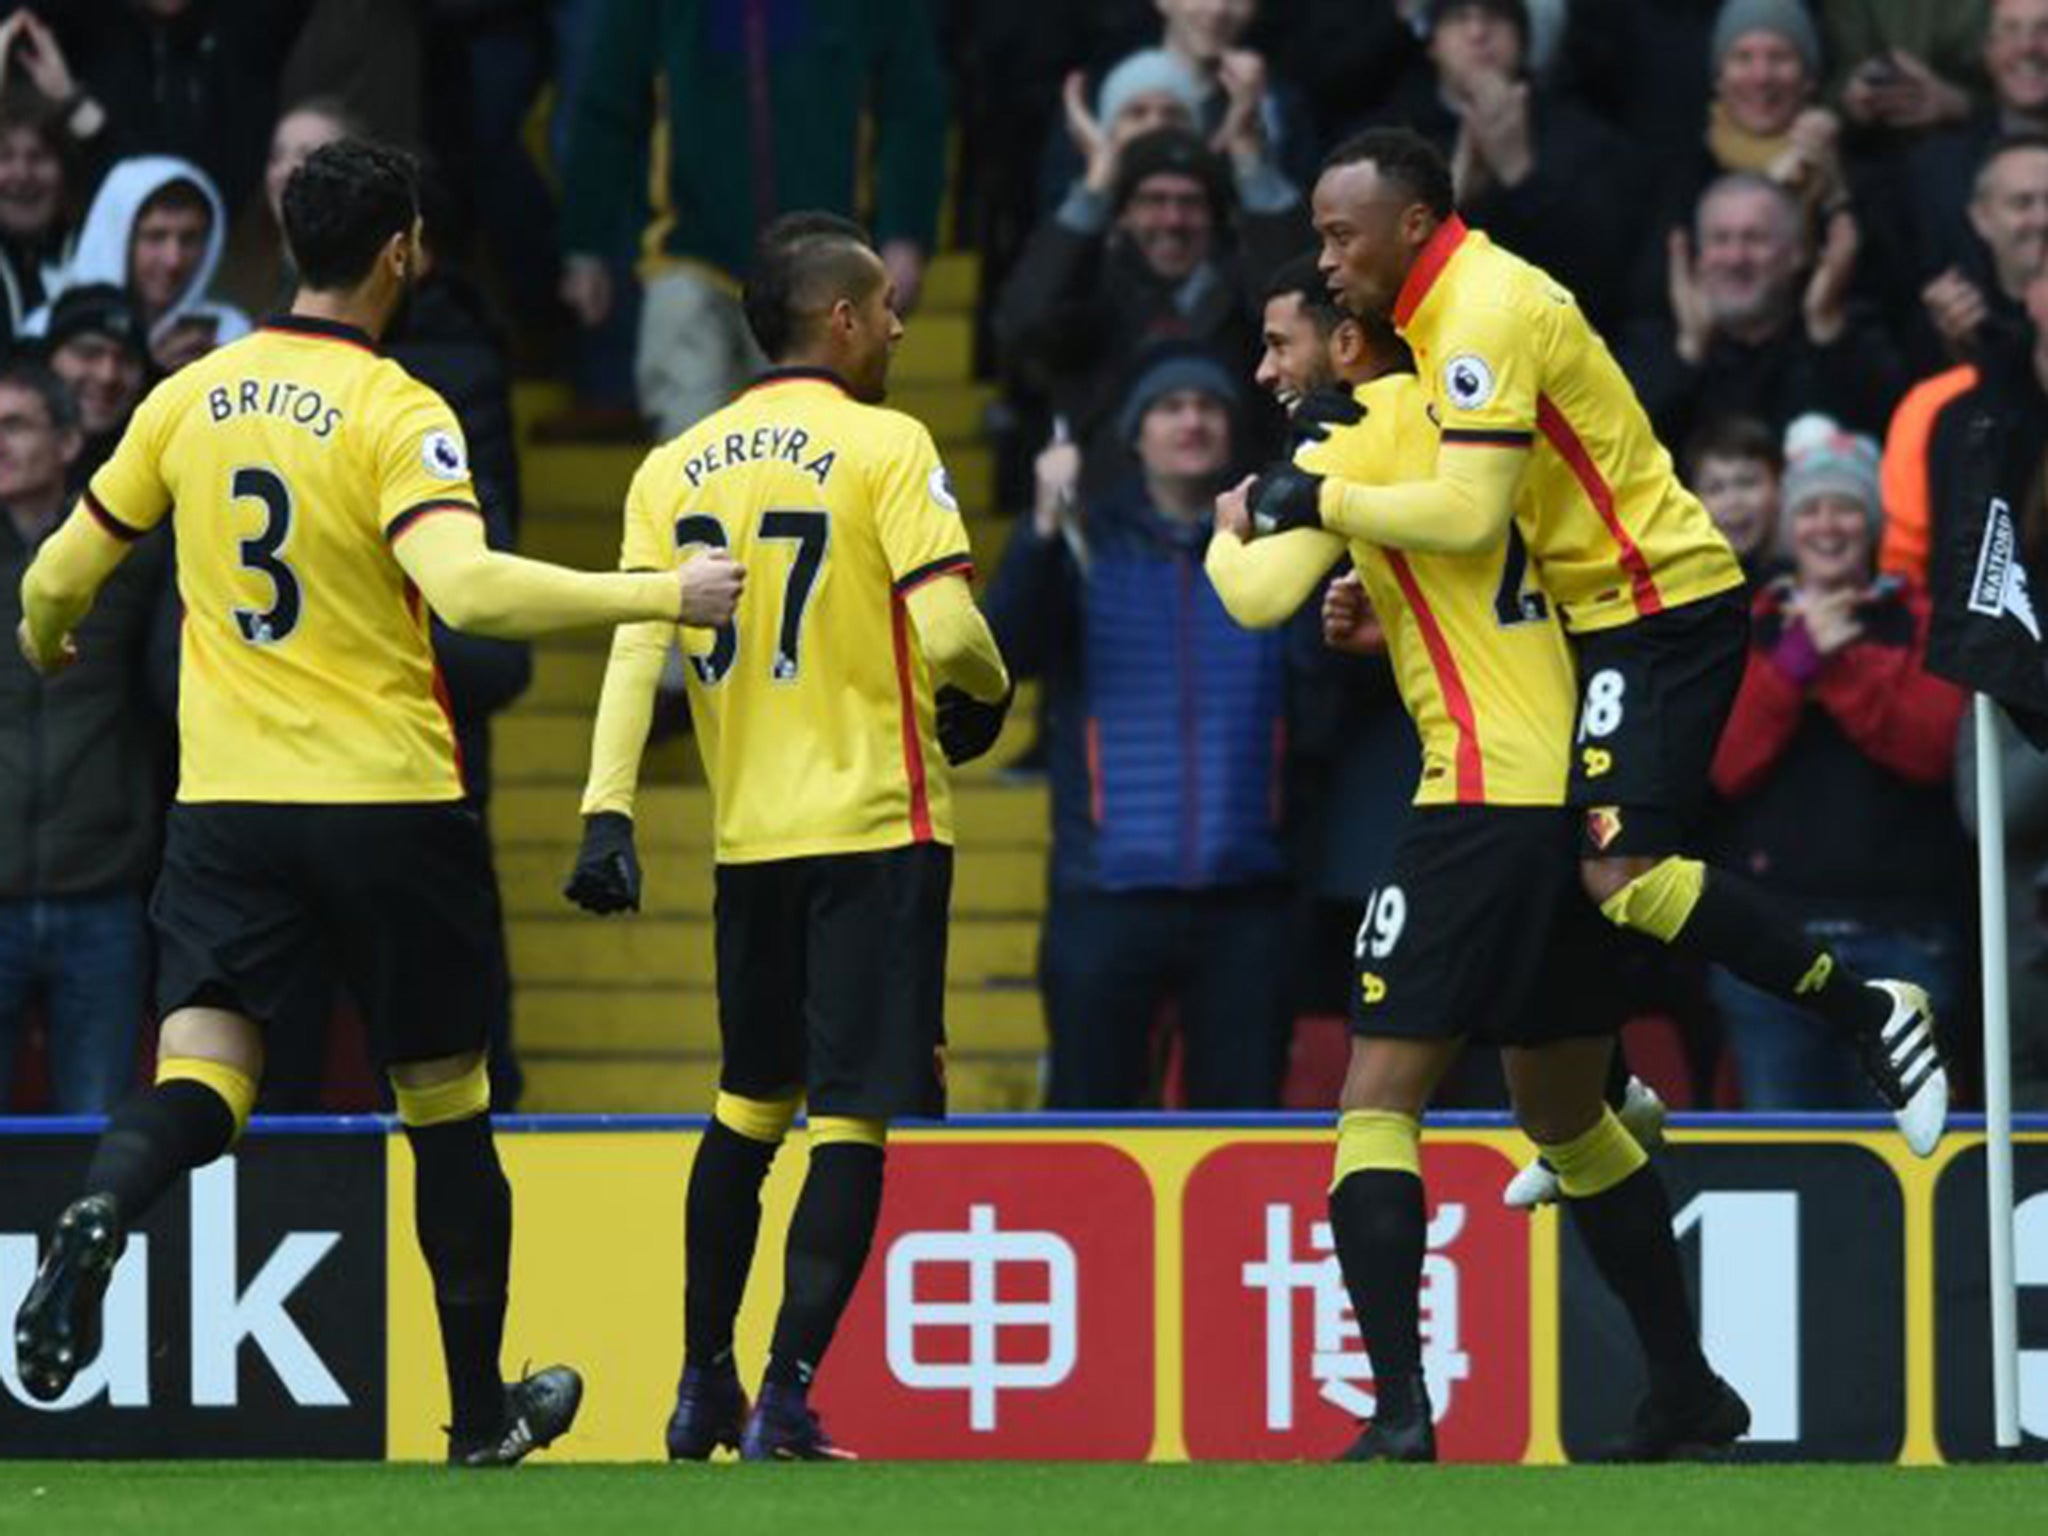 Capoue maintained his excellent goalscoring record this season with an early strike